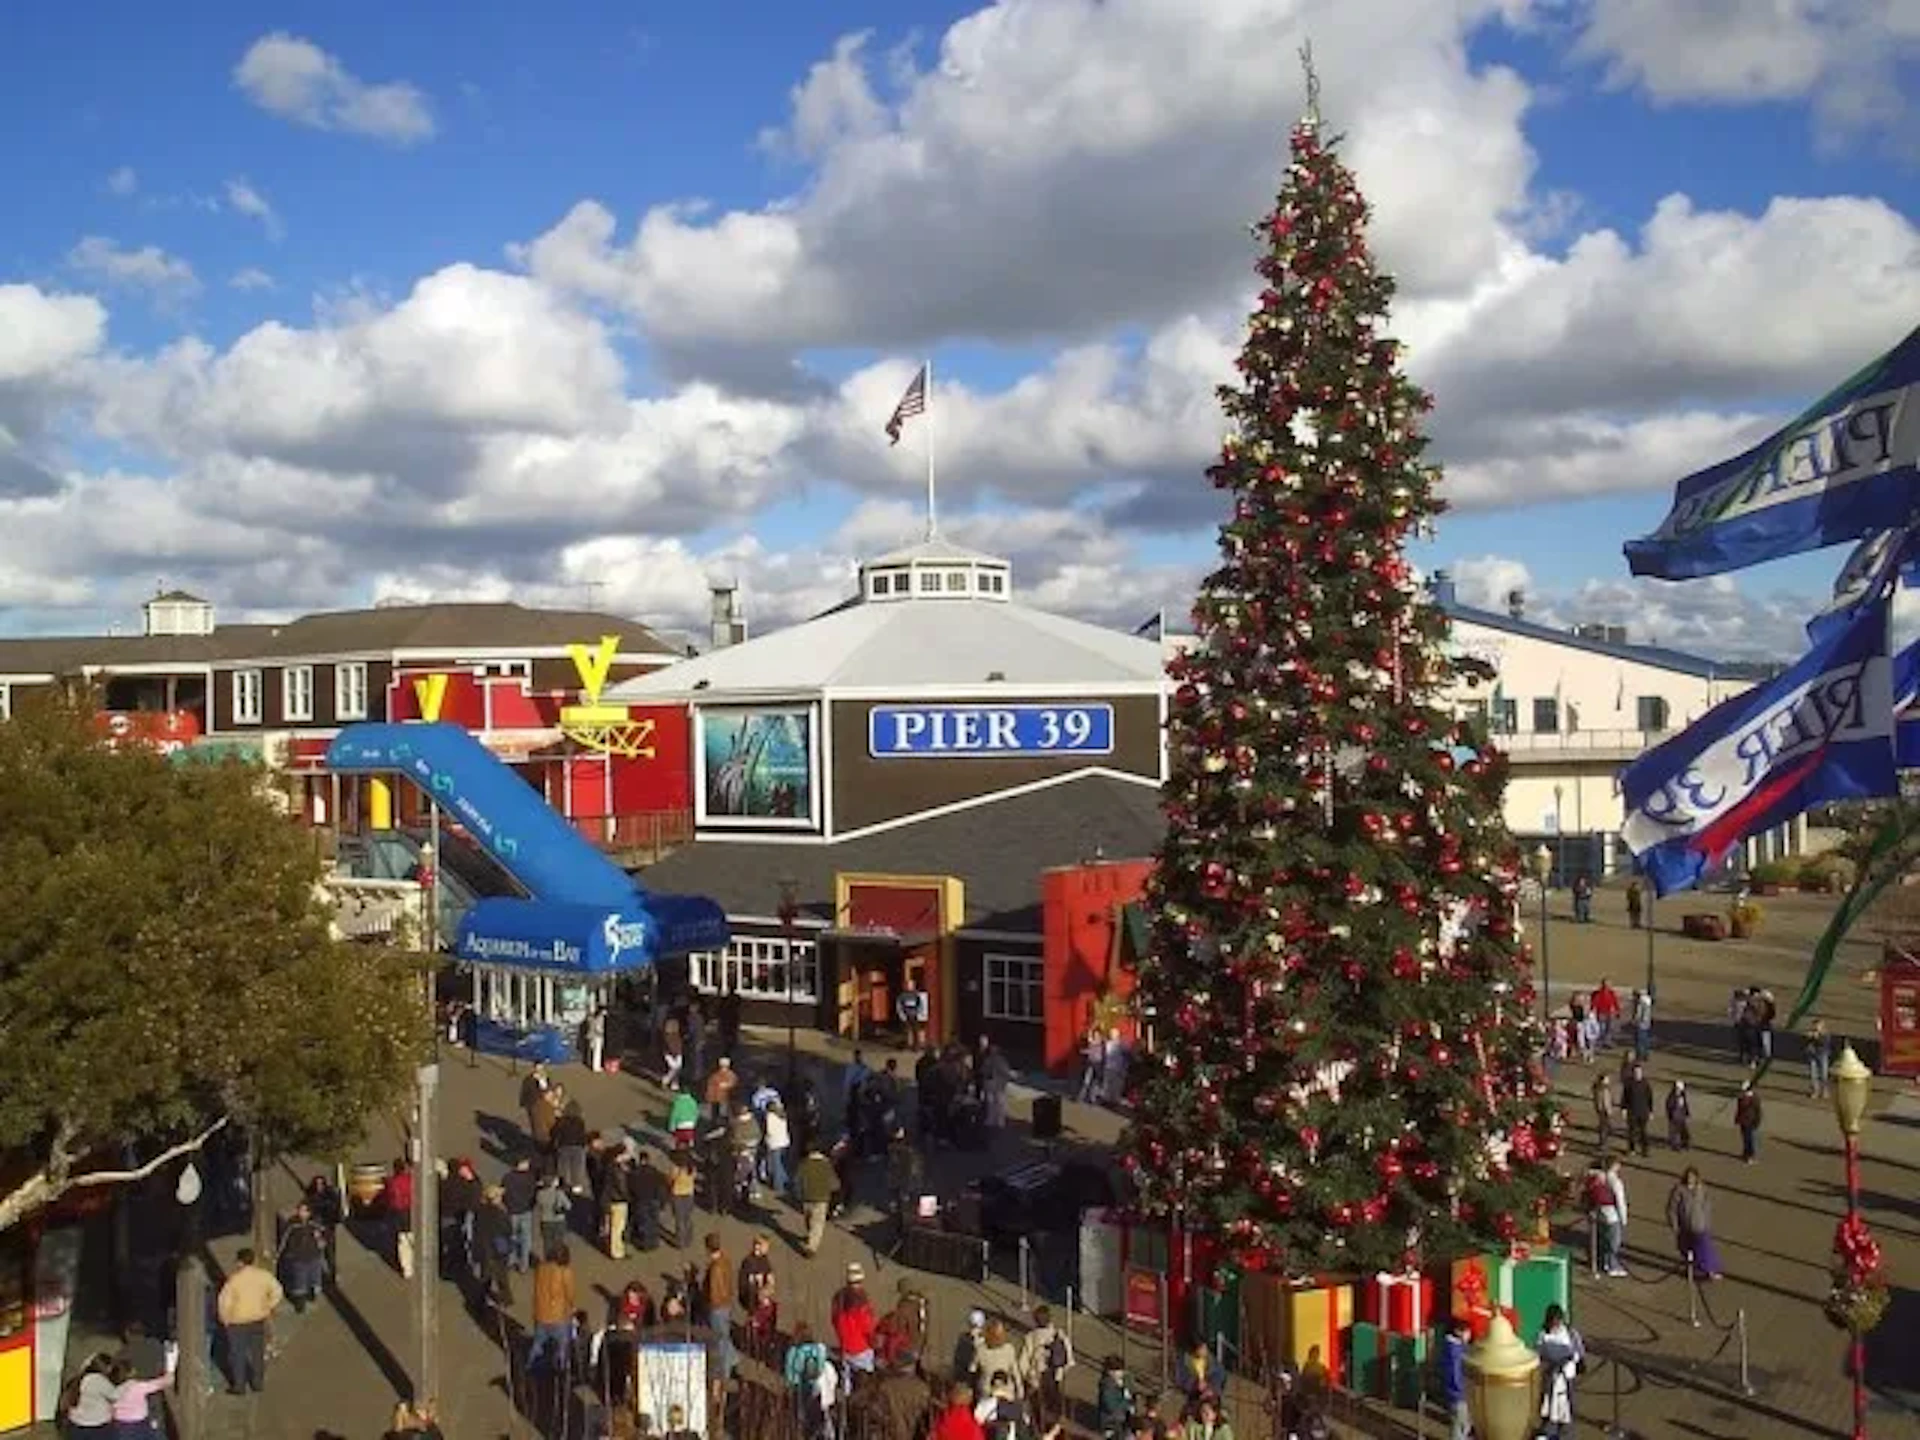 Pier 39 Christmas tree is part of the Holiday Lights tour with San Francisco Jeep Tours